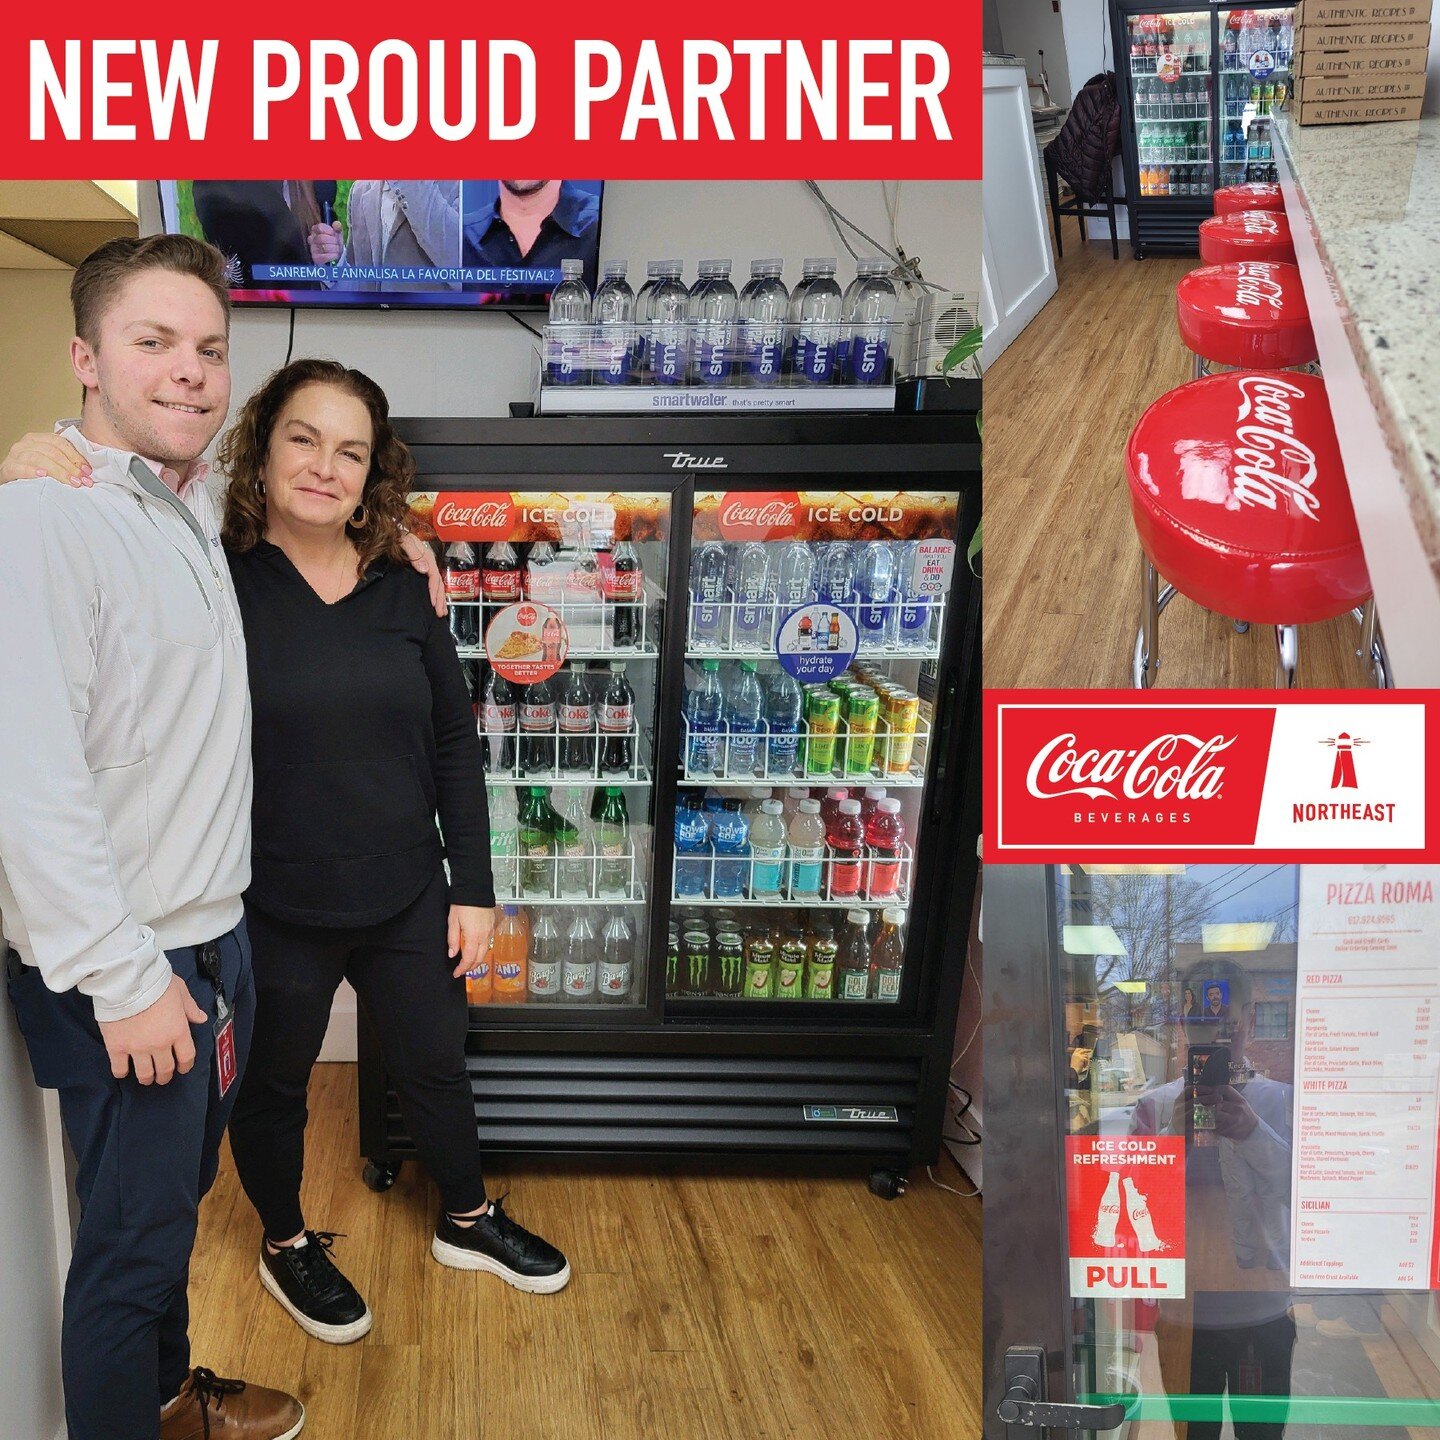 New Proud Partner!! Pizza Roma in Watertown, MA is now serving delicious Coca-Cola products. We are thrilled to welcome them to the Coke Northeast customer family.

Shout out to Account Manager Tyler Hebert for securing this great account 👏

Pizza R